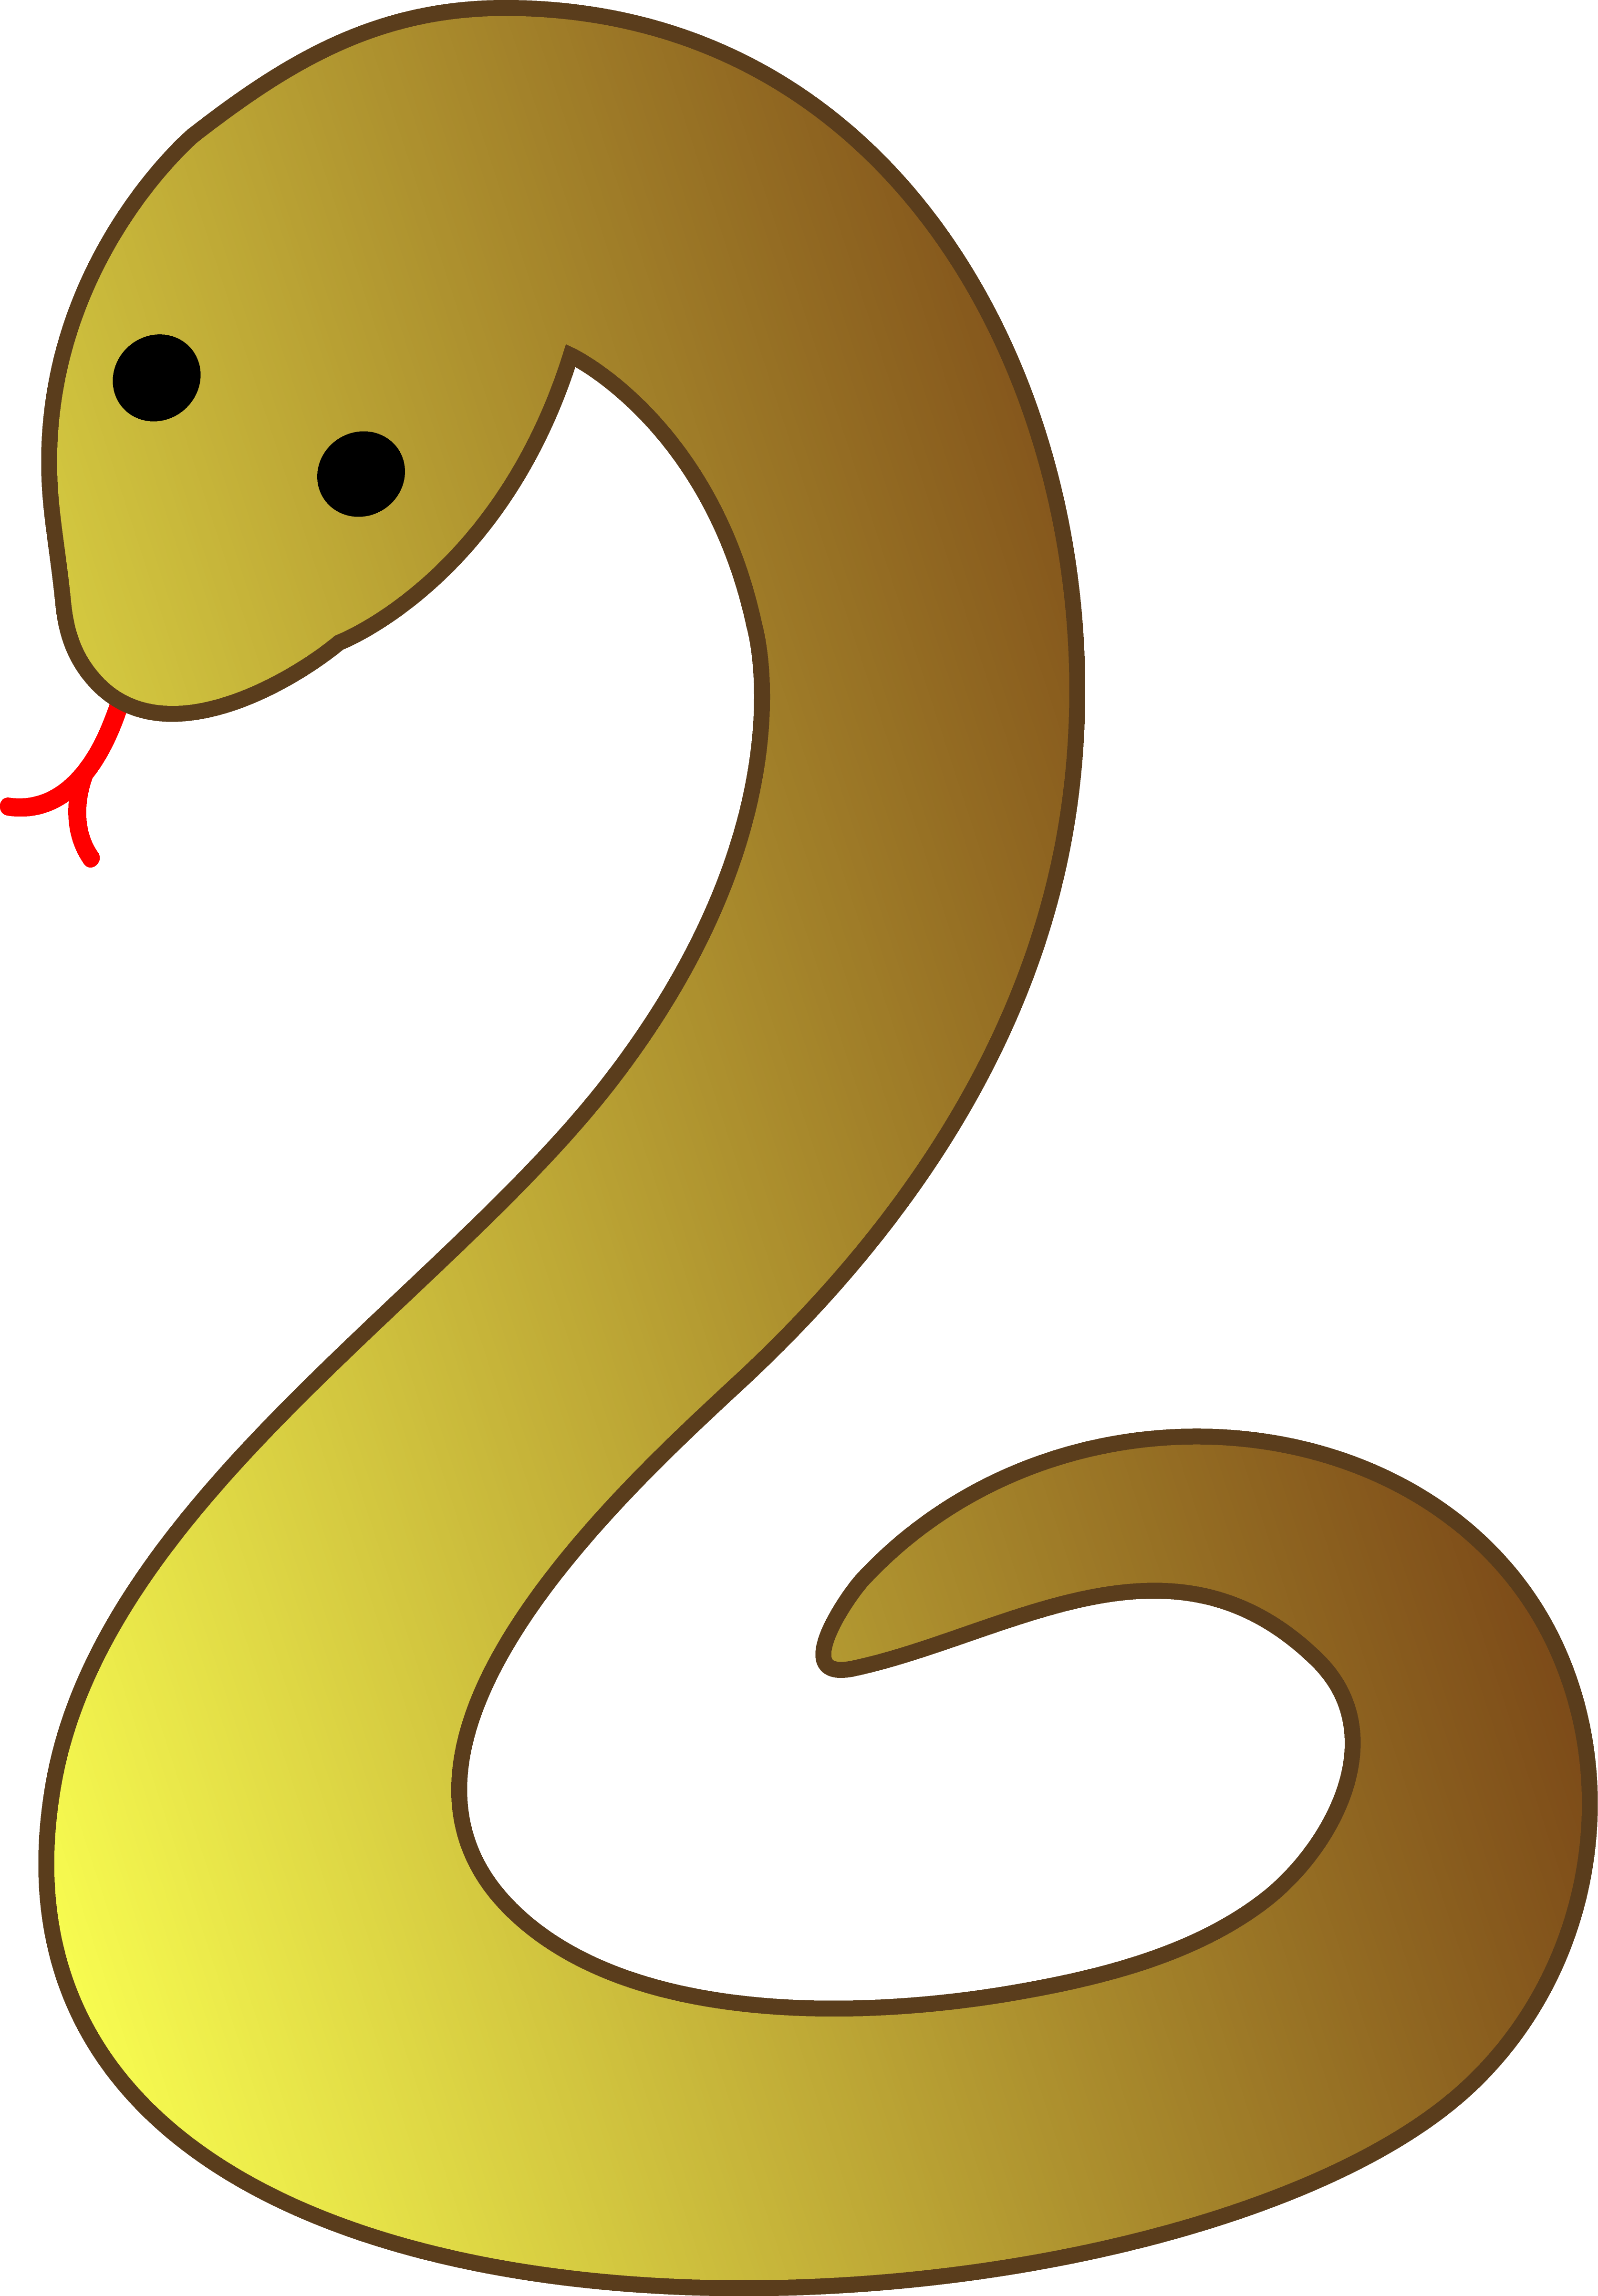 Snake Cartoon Images | Free Download Clip Art | Free Clip Art | on ...